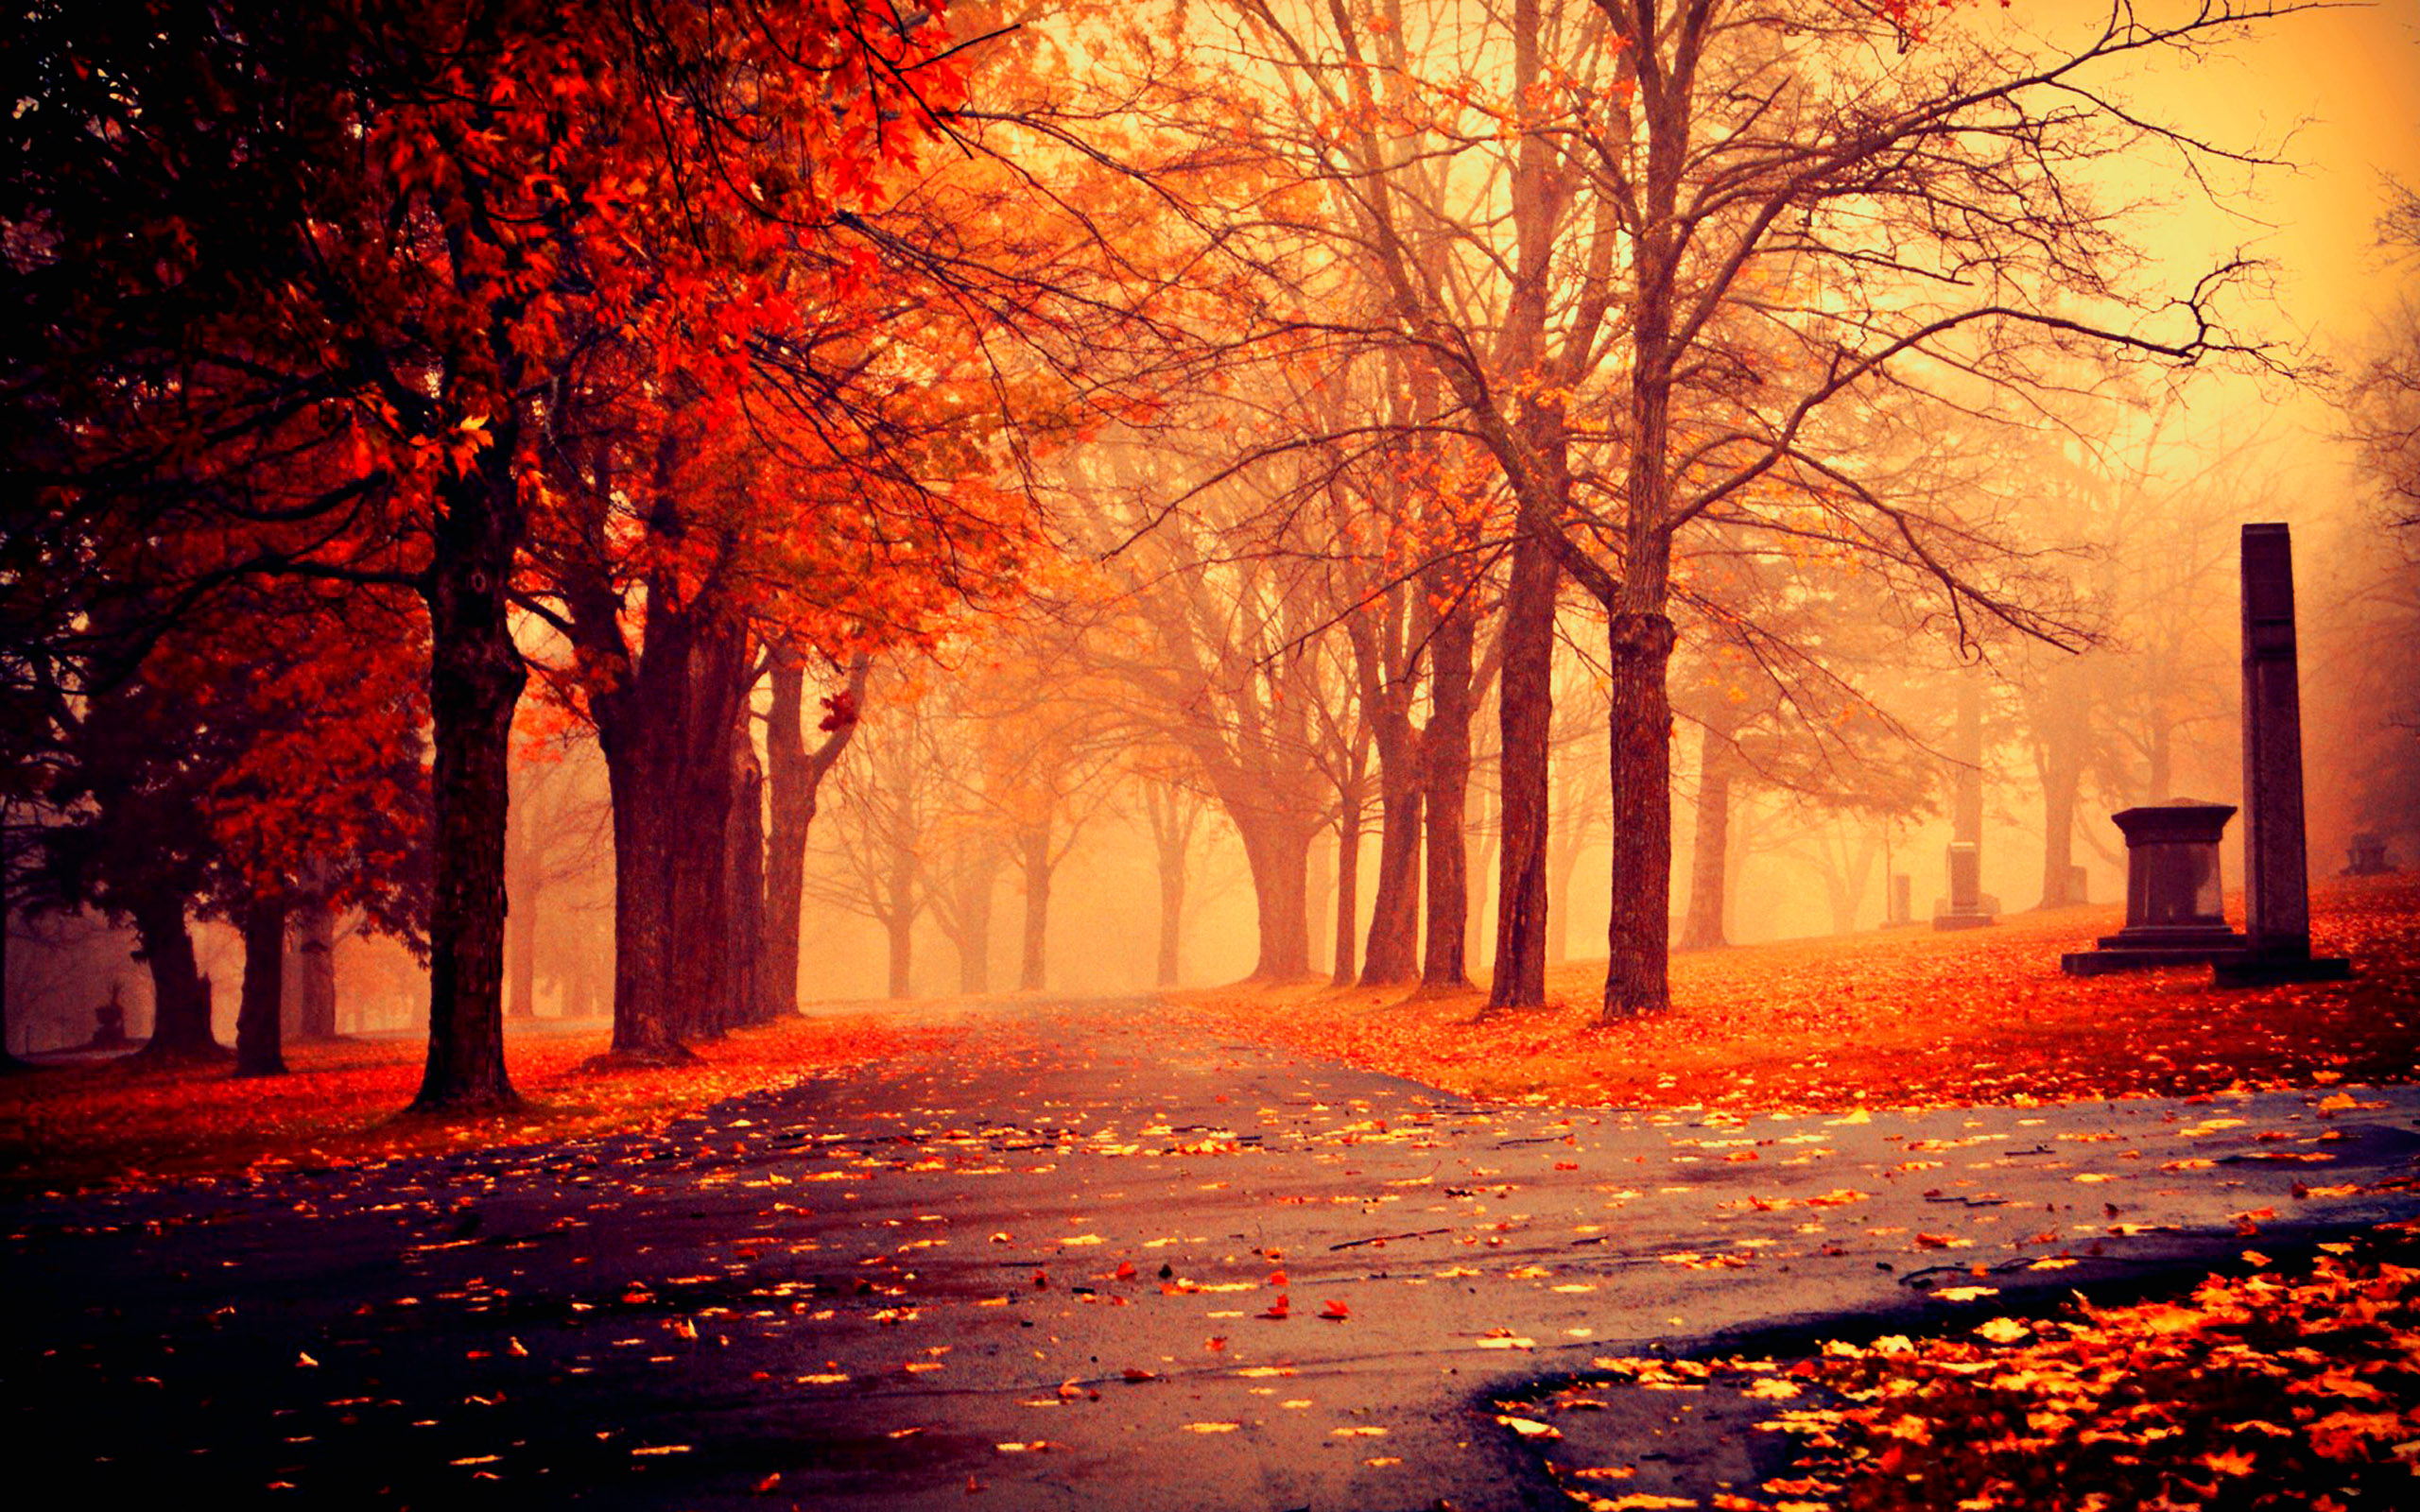 Autumn Nature Wallpapers HD Pictures One HD Wallpaper Pictures 2560x1600